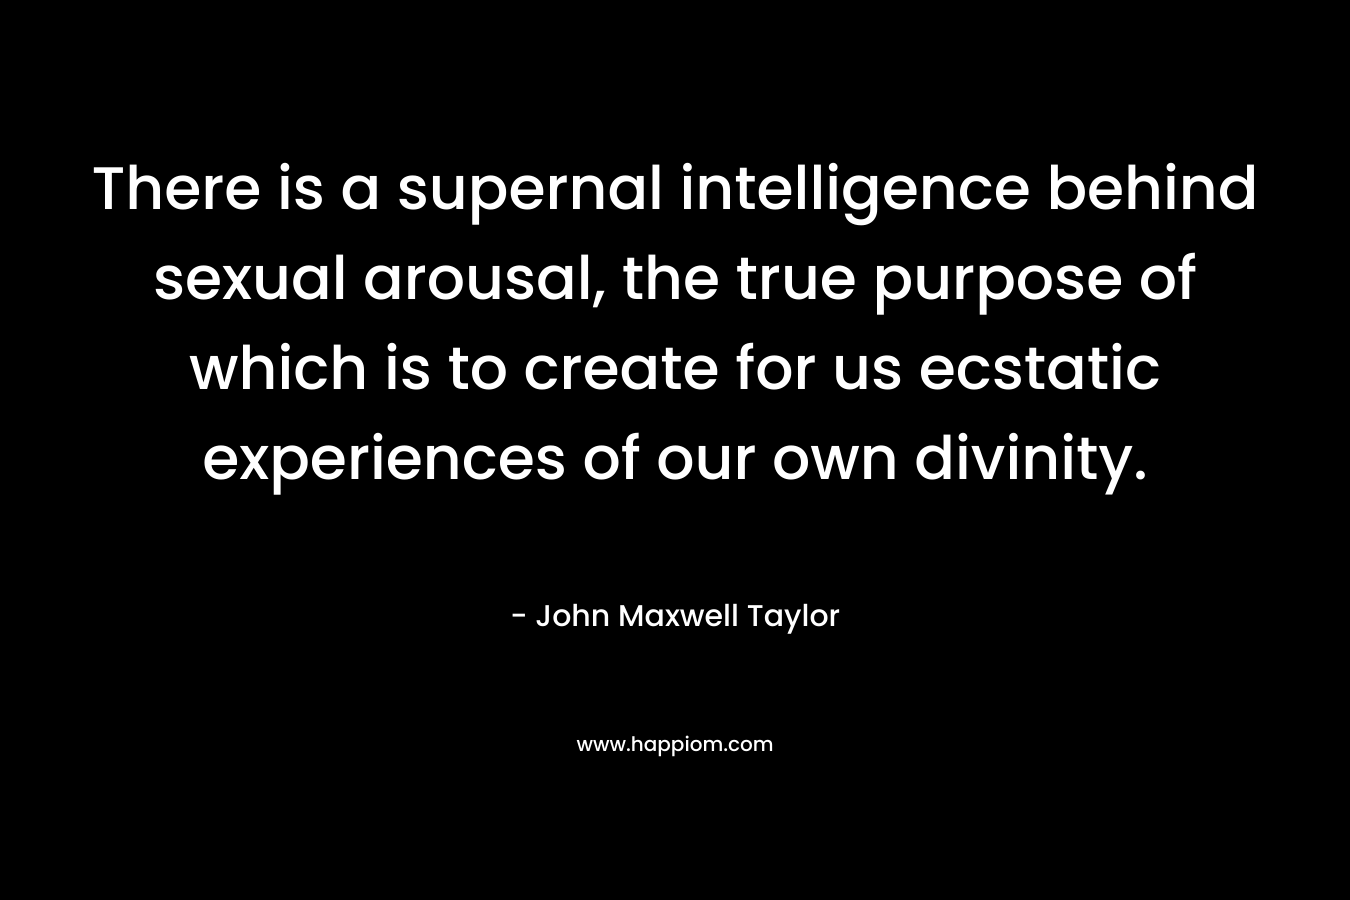 There is a supernal intelligence behind sexual arousal, the true purpose of which is to create for us ecstatic experiences of our own divinity.